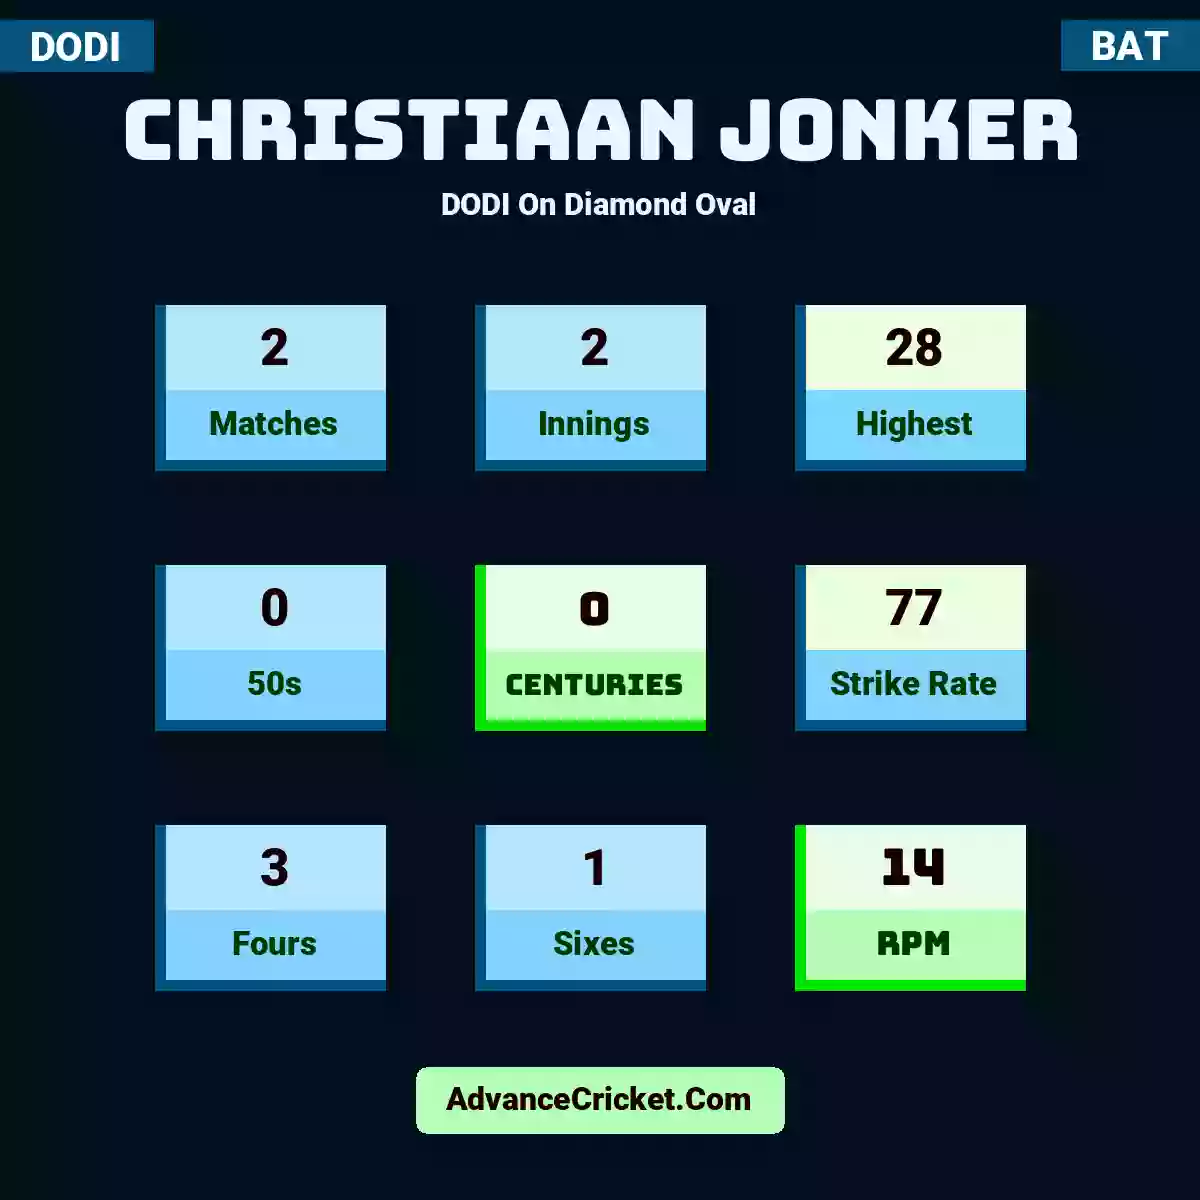 Christiaan Jonker DODI  On Diamond Oval, Christiaan Jonker played 2 matches, scored 28 runs as highest, 0 half-centuries, and 0 centuries, with a strike rate of 77. C.Jonker hit 3 fours and 1 sixes, with an RPM of 14.